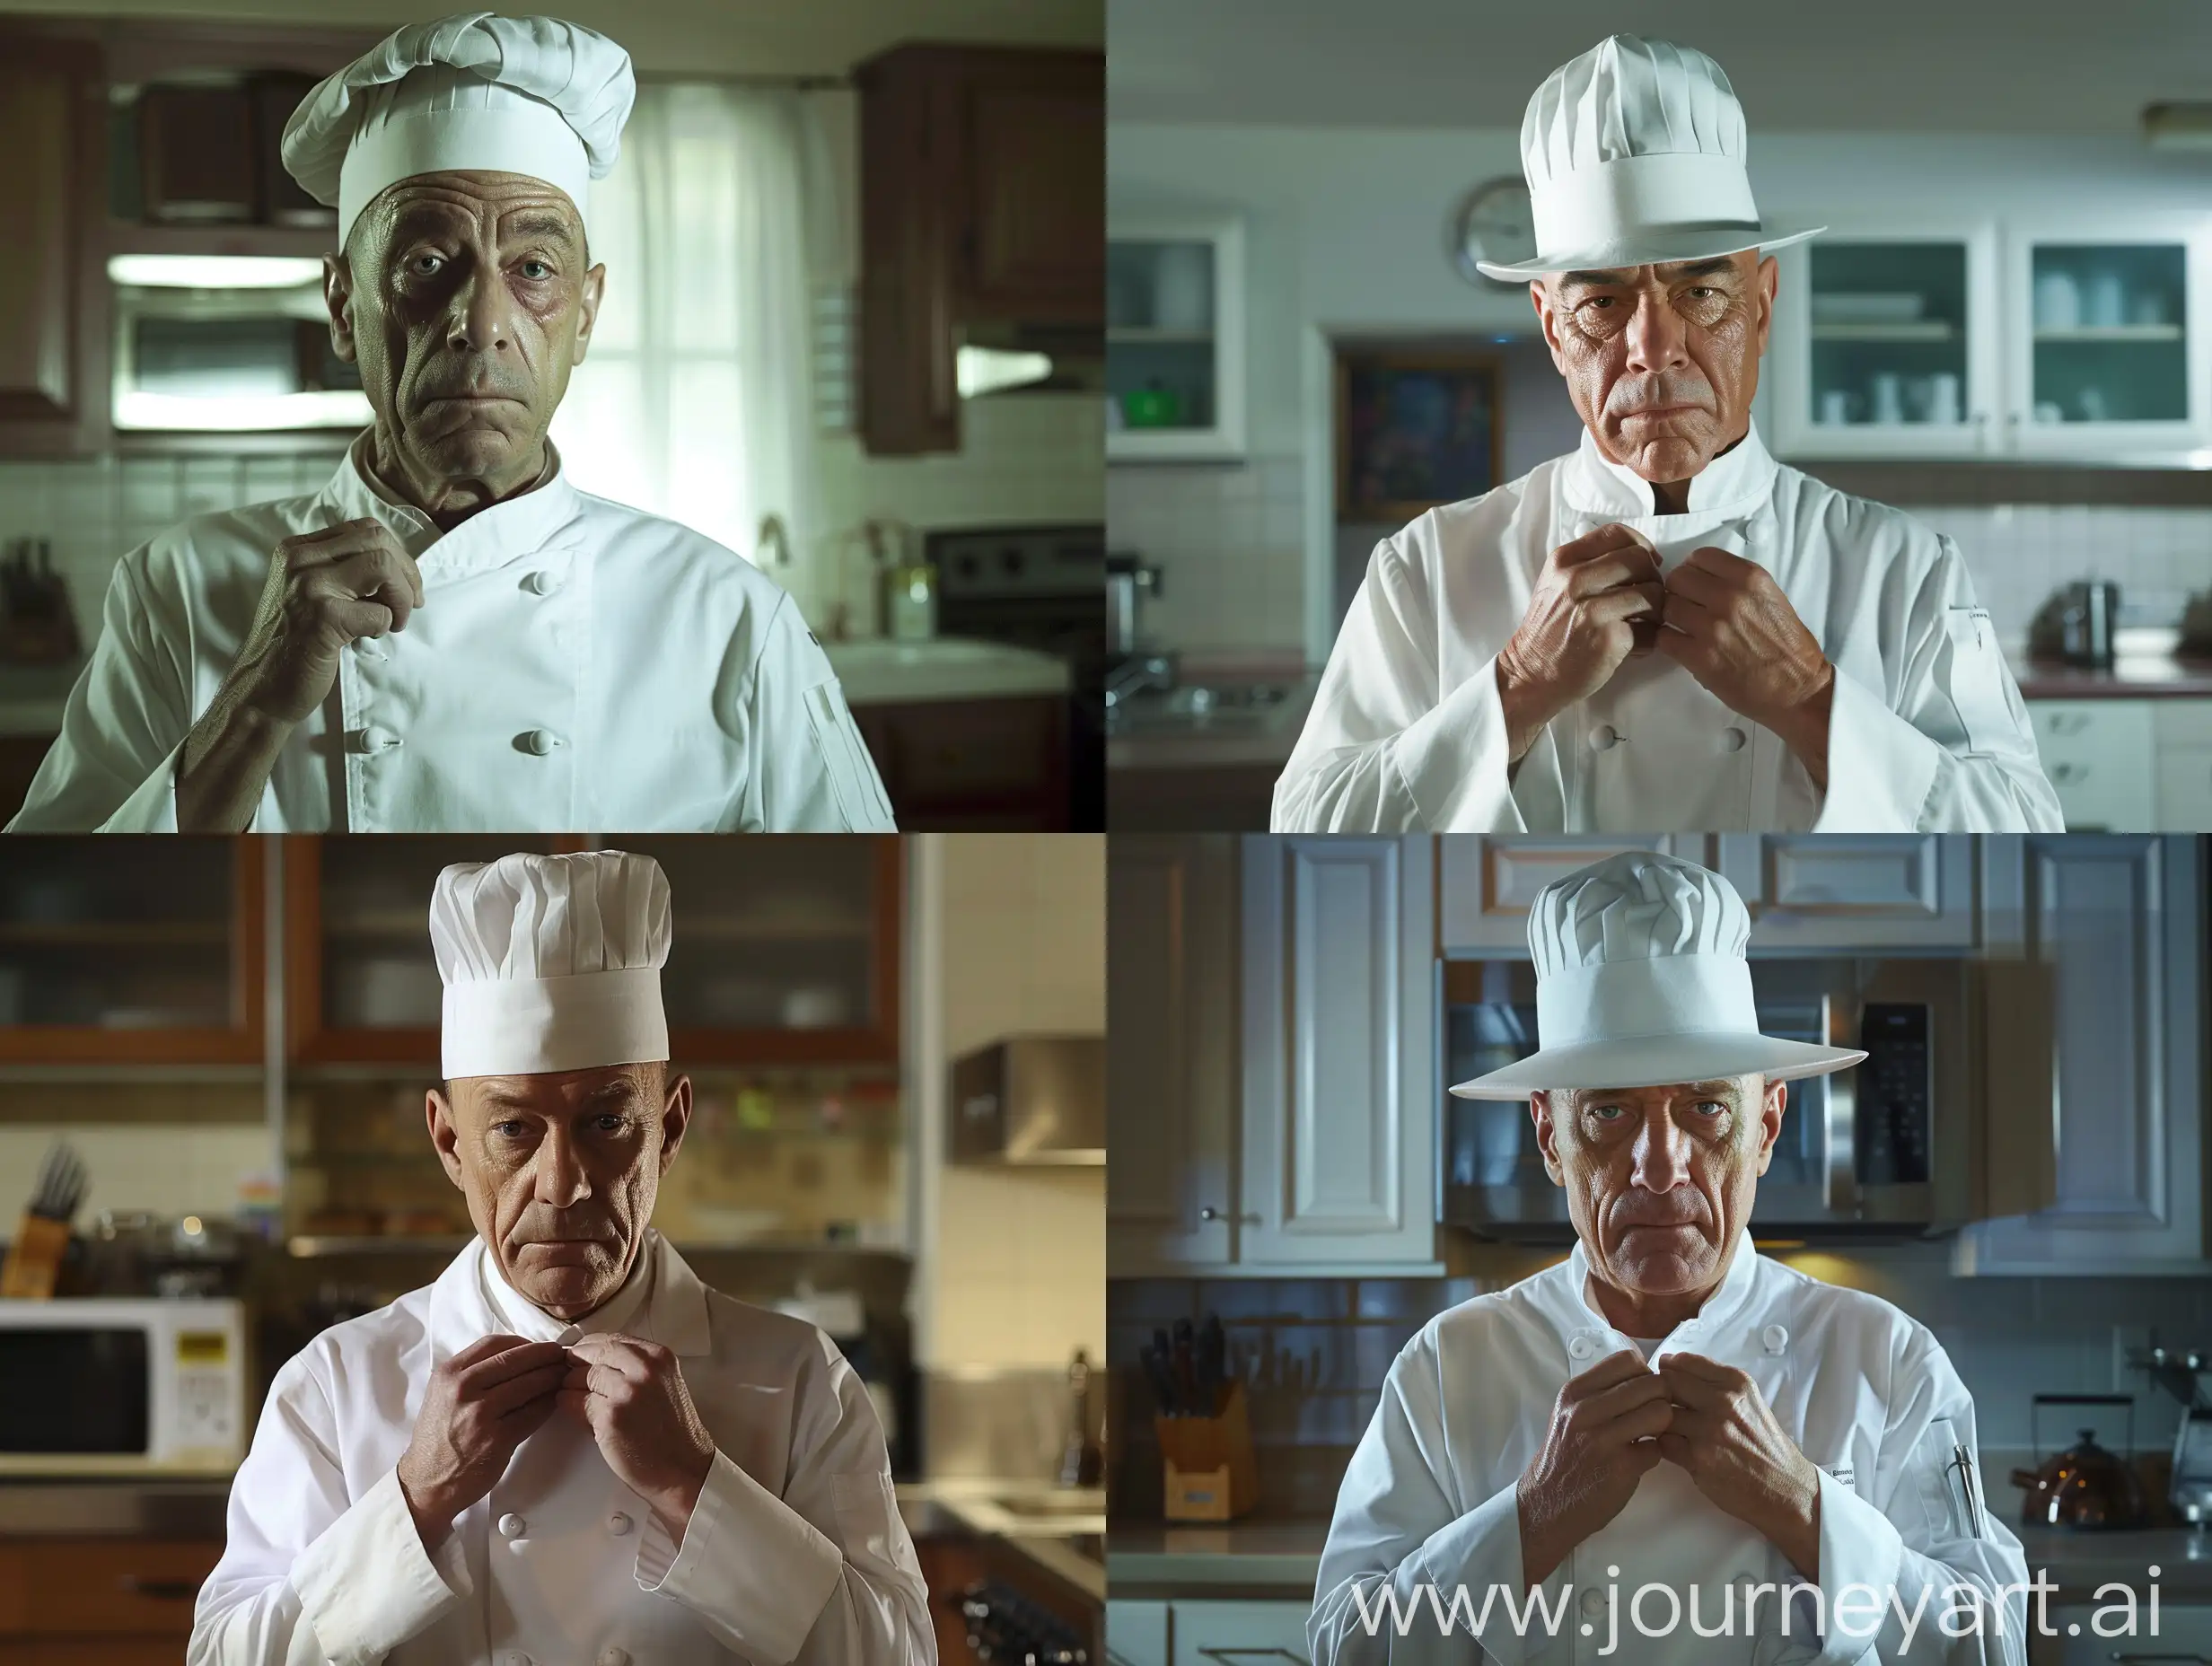 Gustavo Fring (played by Giancarlo Esposito) is bad in Breaking Bad, Gustavo Fring (played by Giancarlo Esposito) wears a white chef's uniform, Gustavo Fring (played by Giancarlo Esposito) wears a white chef's hat, Gustavo Fring tries to tie his tie slow, kitchen background, very very less happy face, modern lighting,  clear, , realistic ,q2